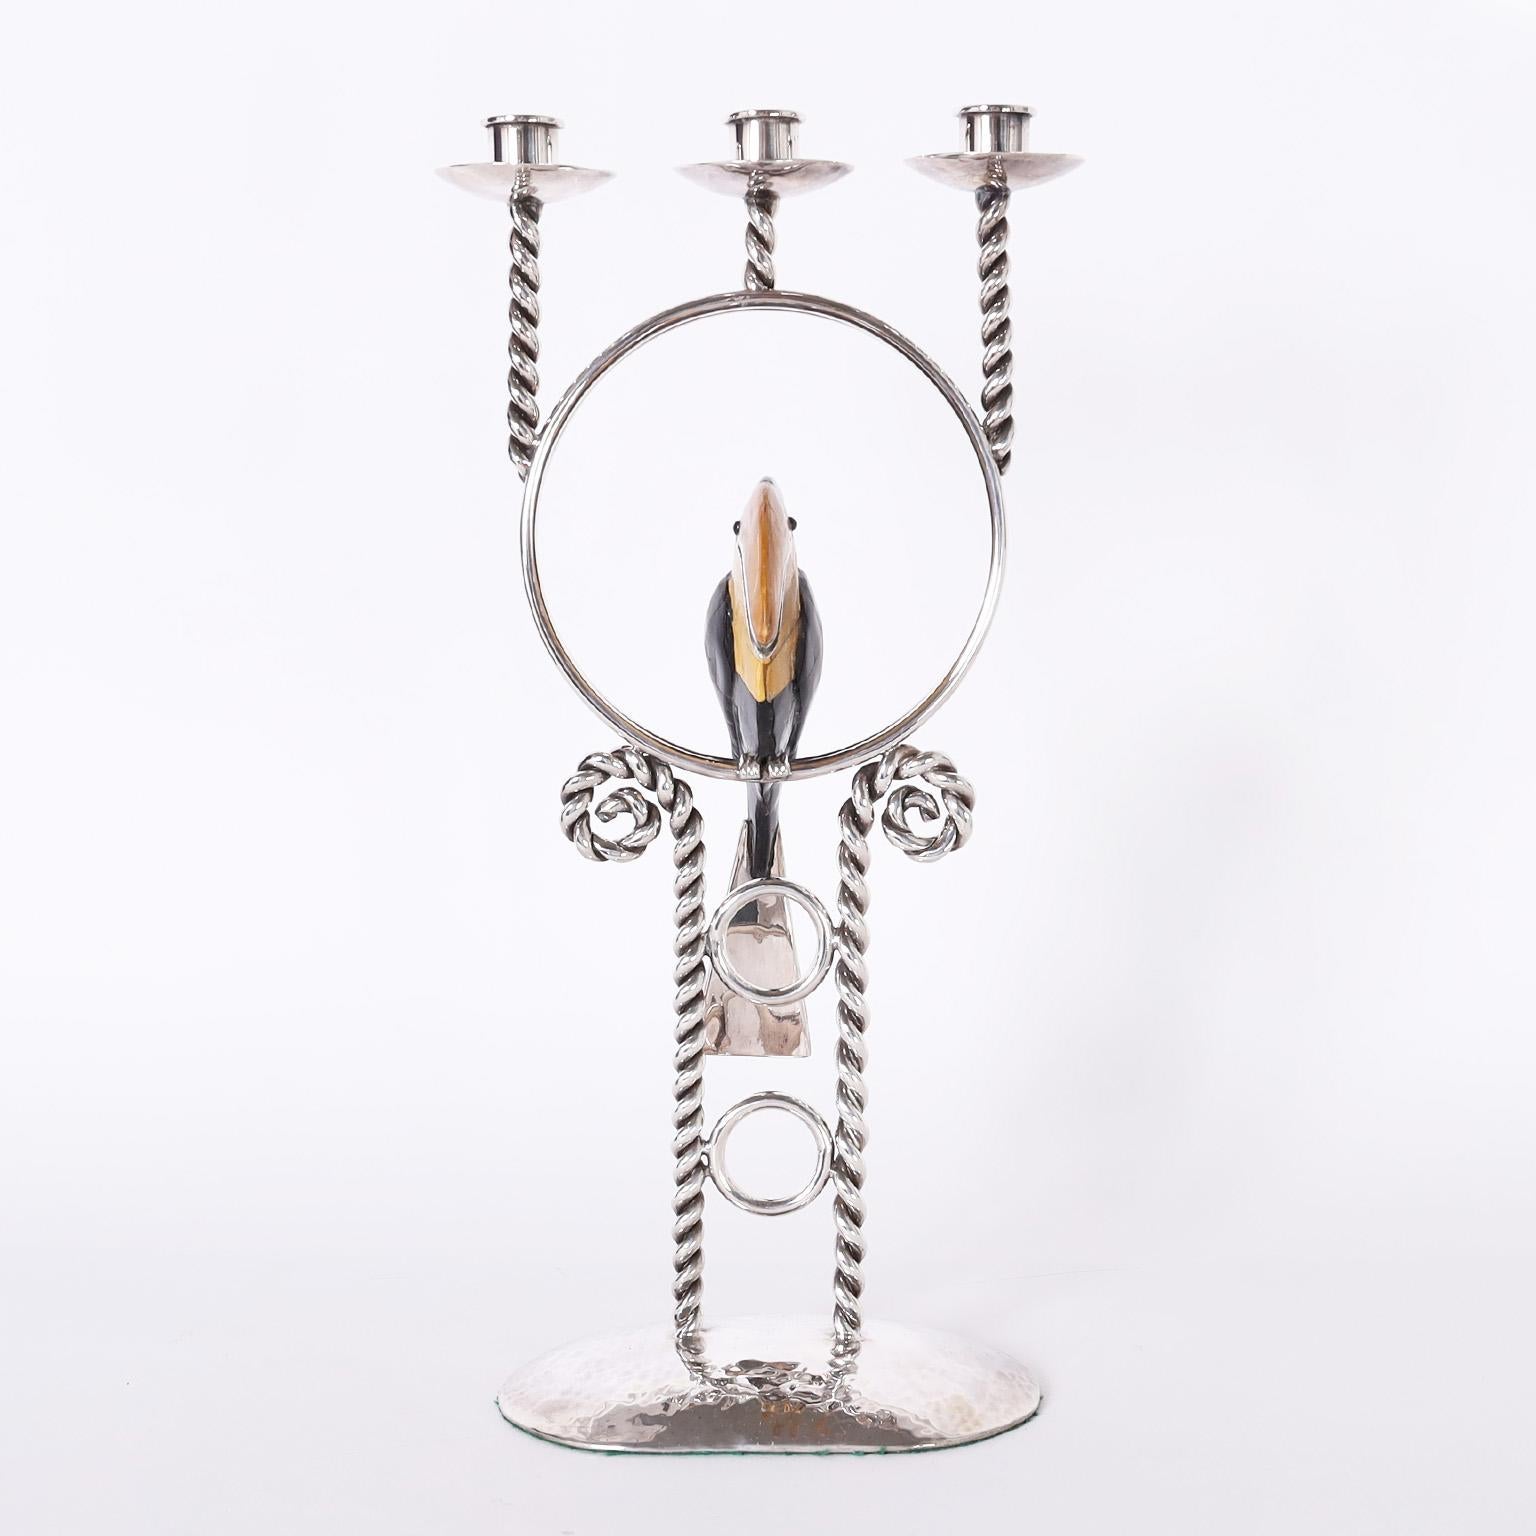 Rare and remarkable whimsical candelabra crafted in silverplate over copper by master silversmith Emllia Castillo with three candle cups over twisted supports featuring a perched toucan clad in stone on a base with twisted supports on a hammered